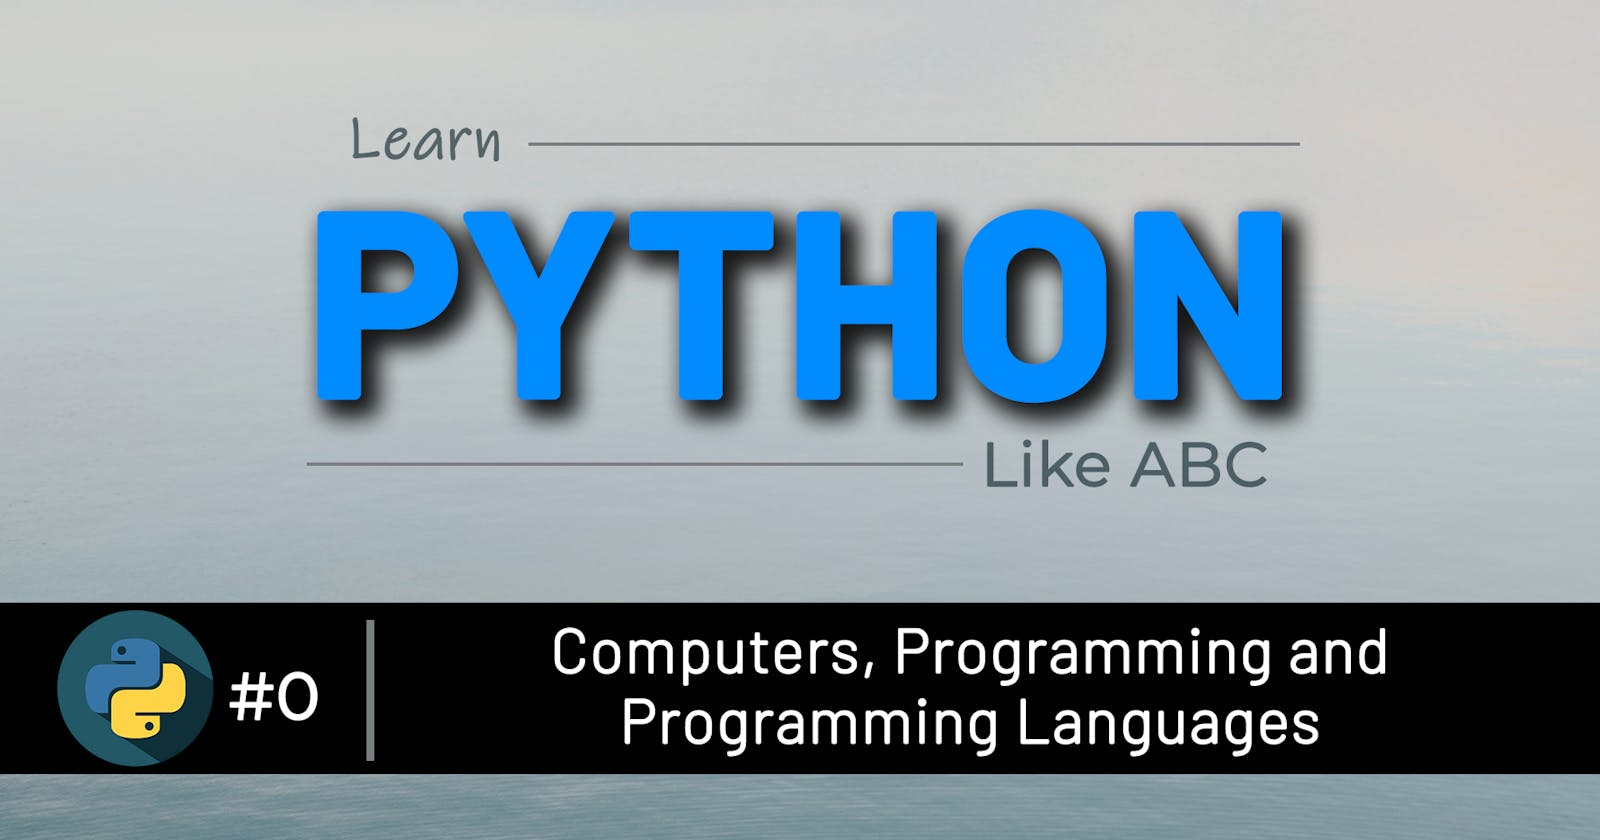 00 Computers, Programming, and Programming Languages? | Learn Python like ABC: